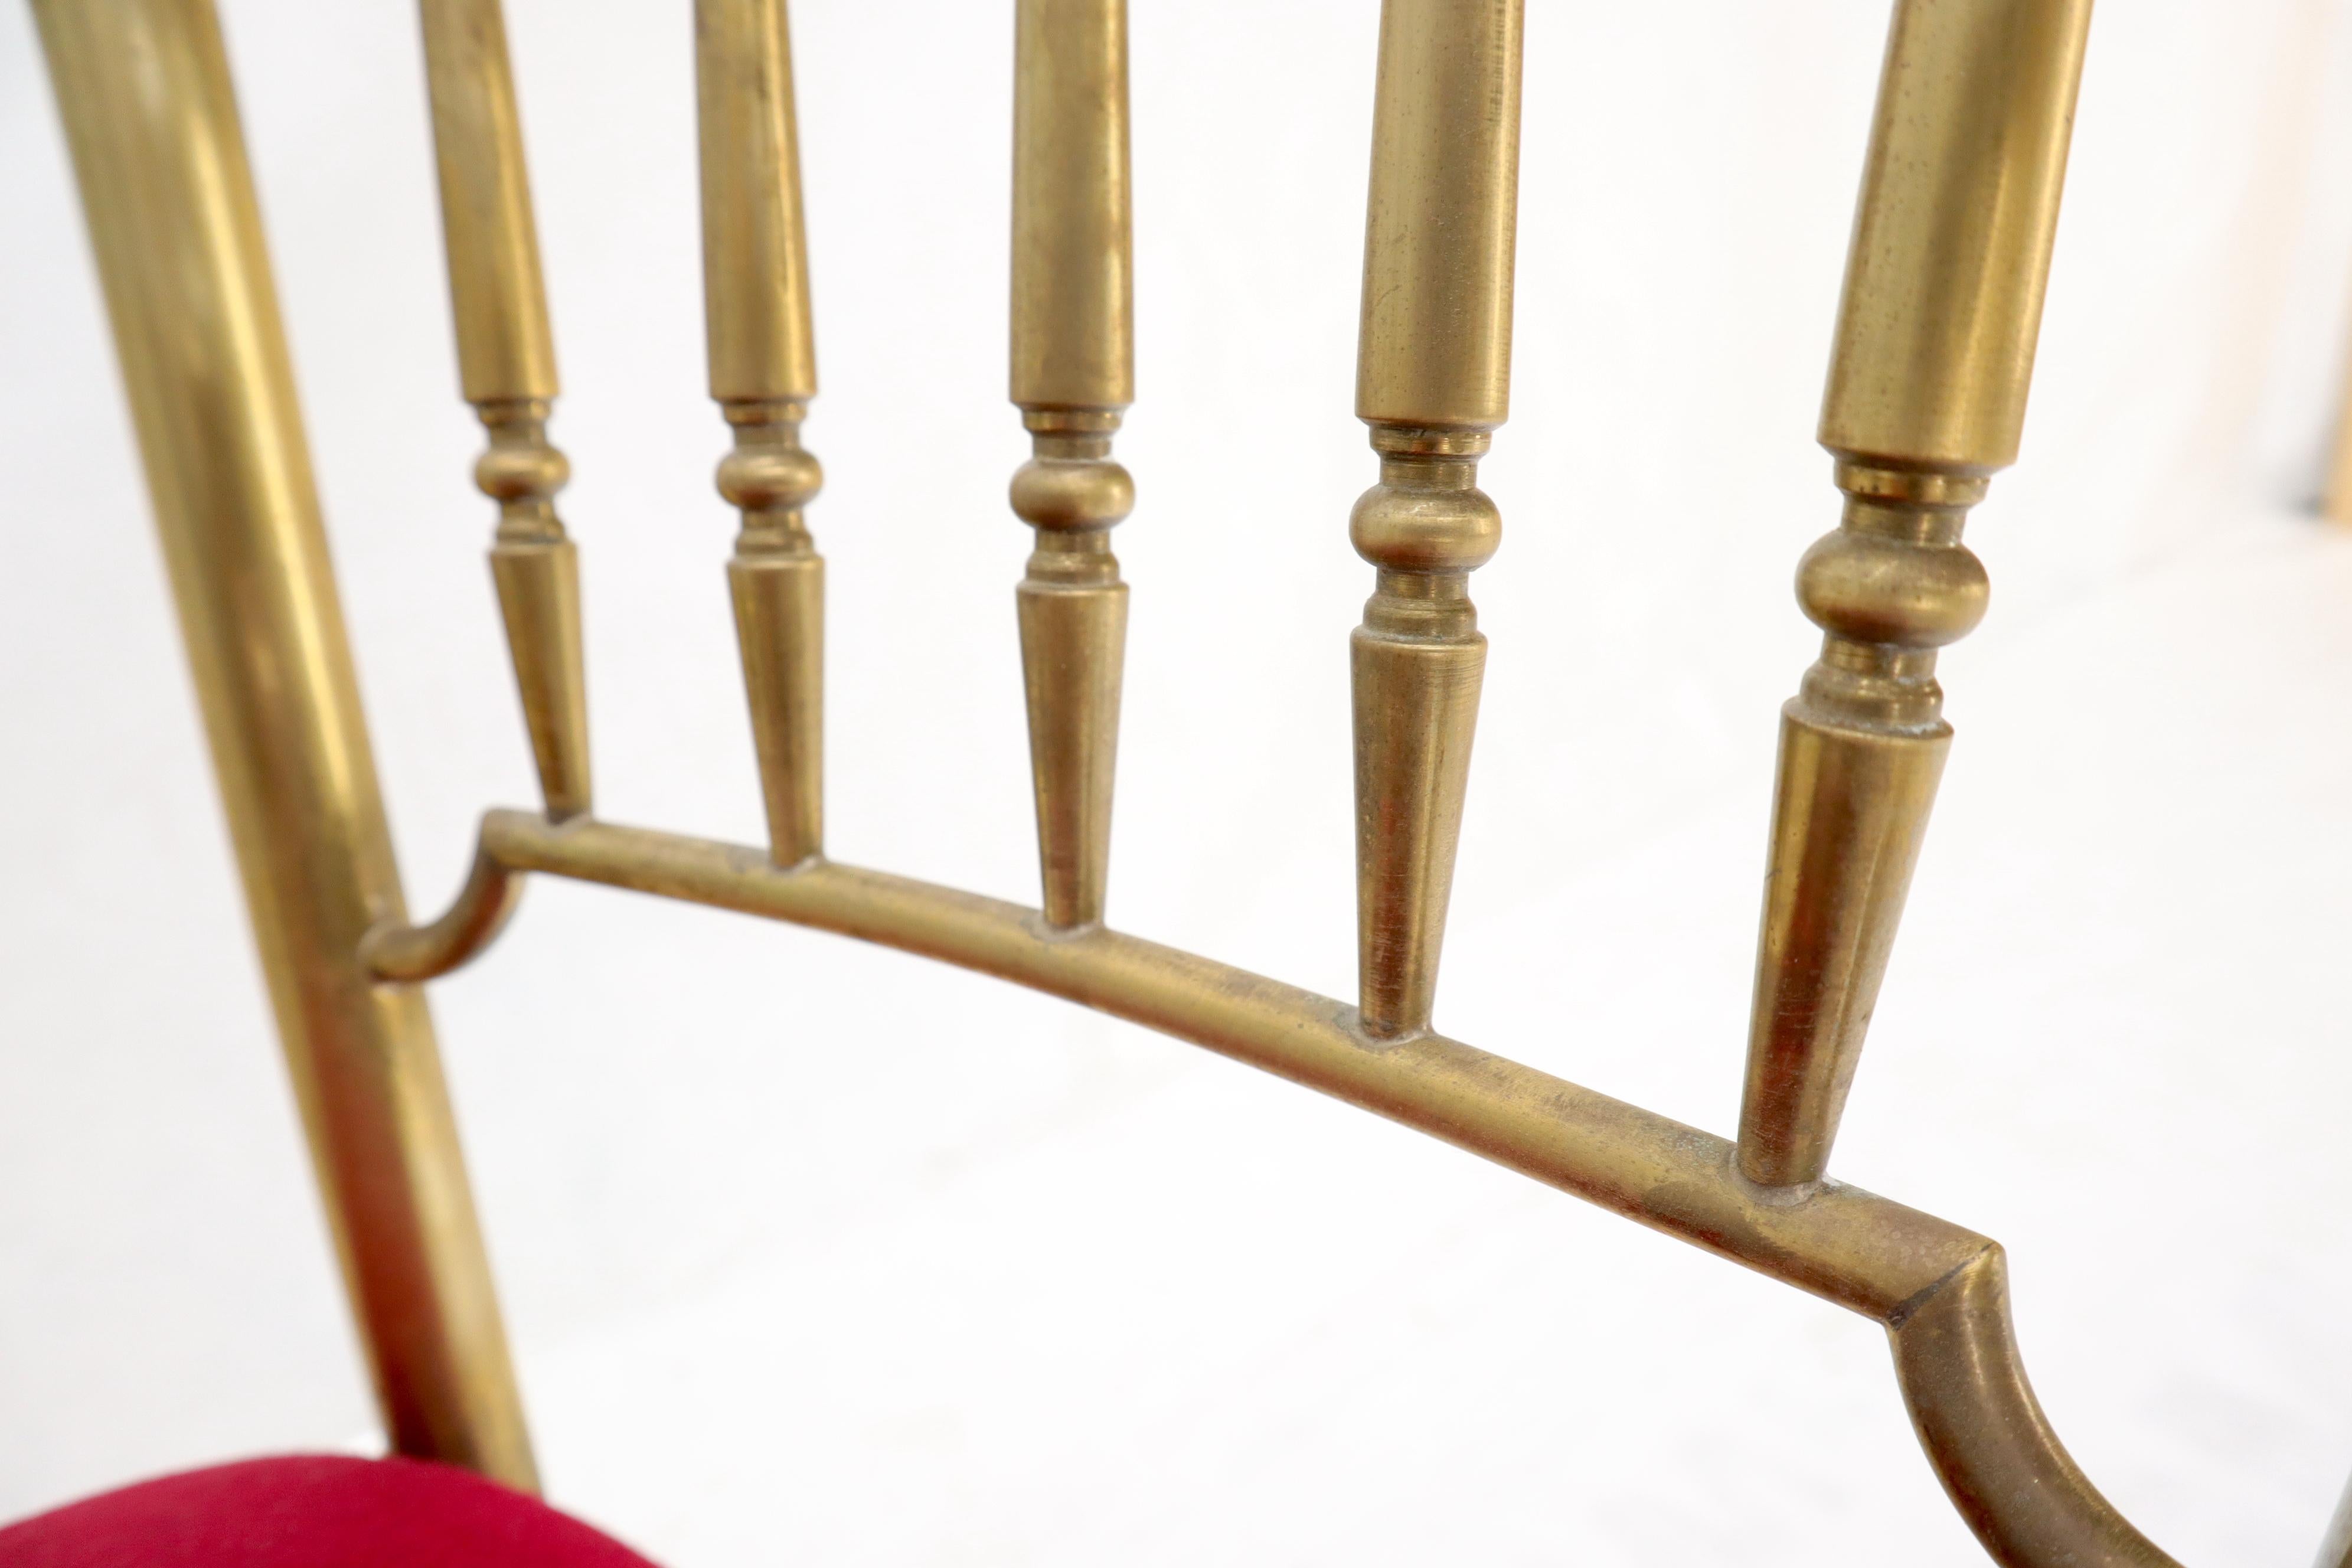 Set of 3 Italian Solid Brass Chiavari Chairs From 1950s New Upholstery For Sale 7